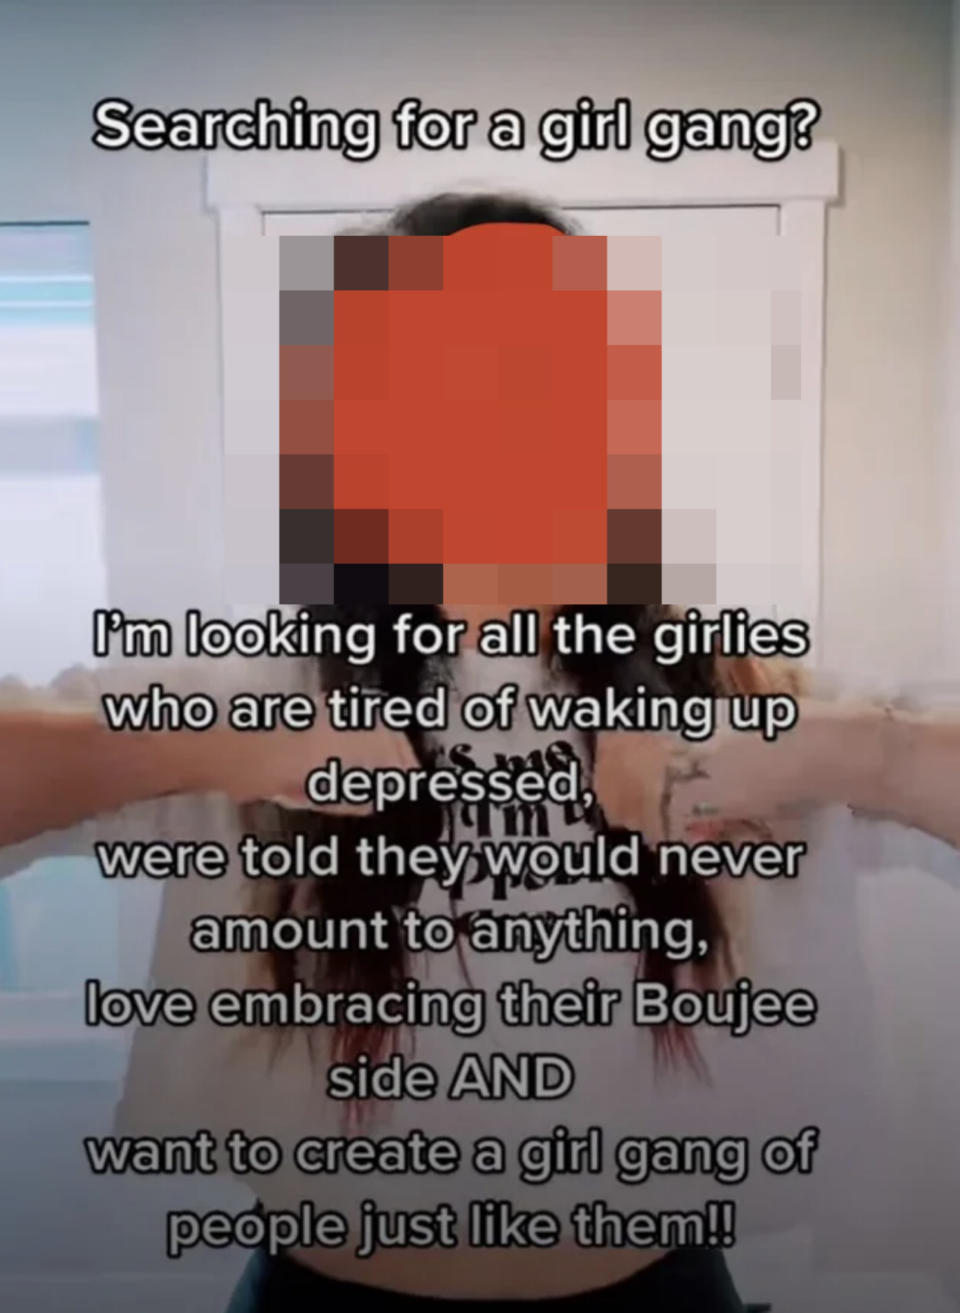 person looking for women who are tired of waking up depressed and ready to join a girl gang